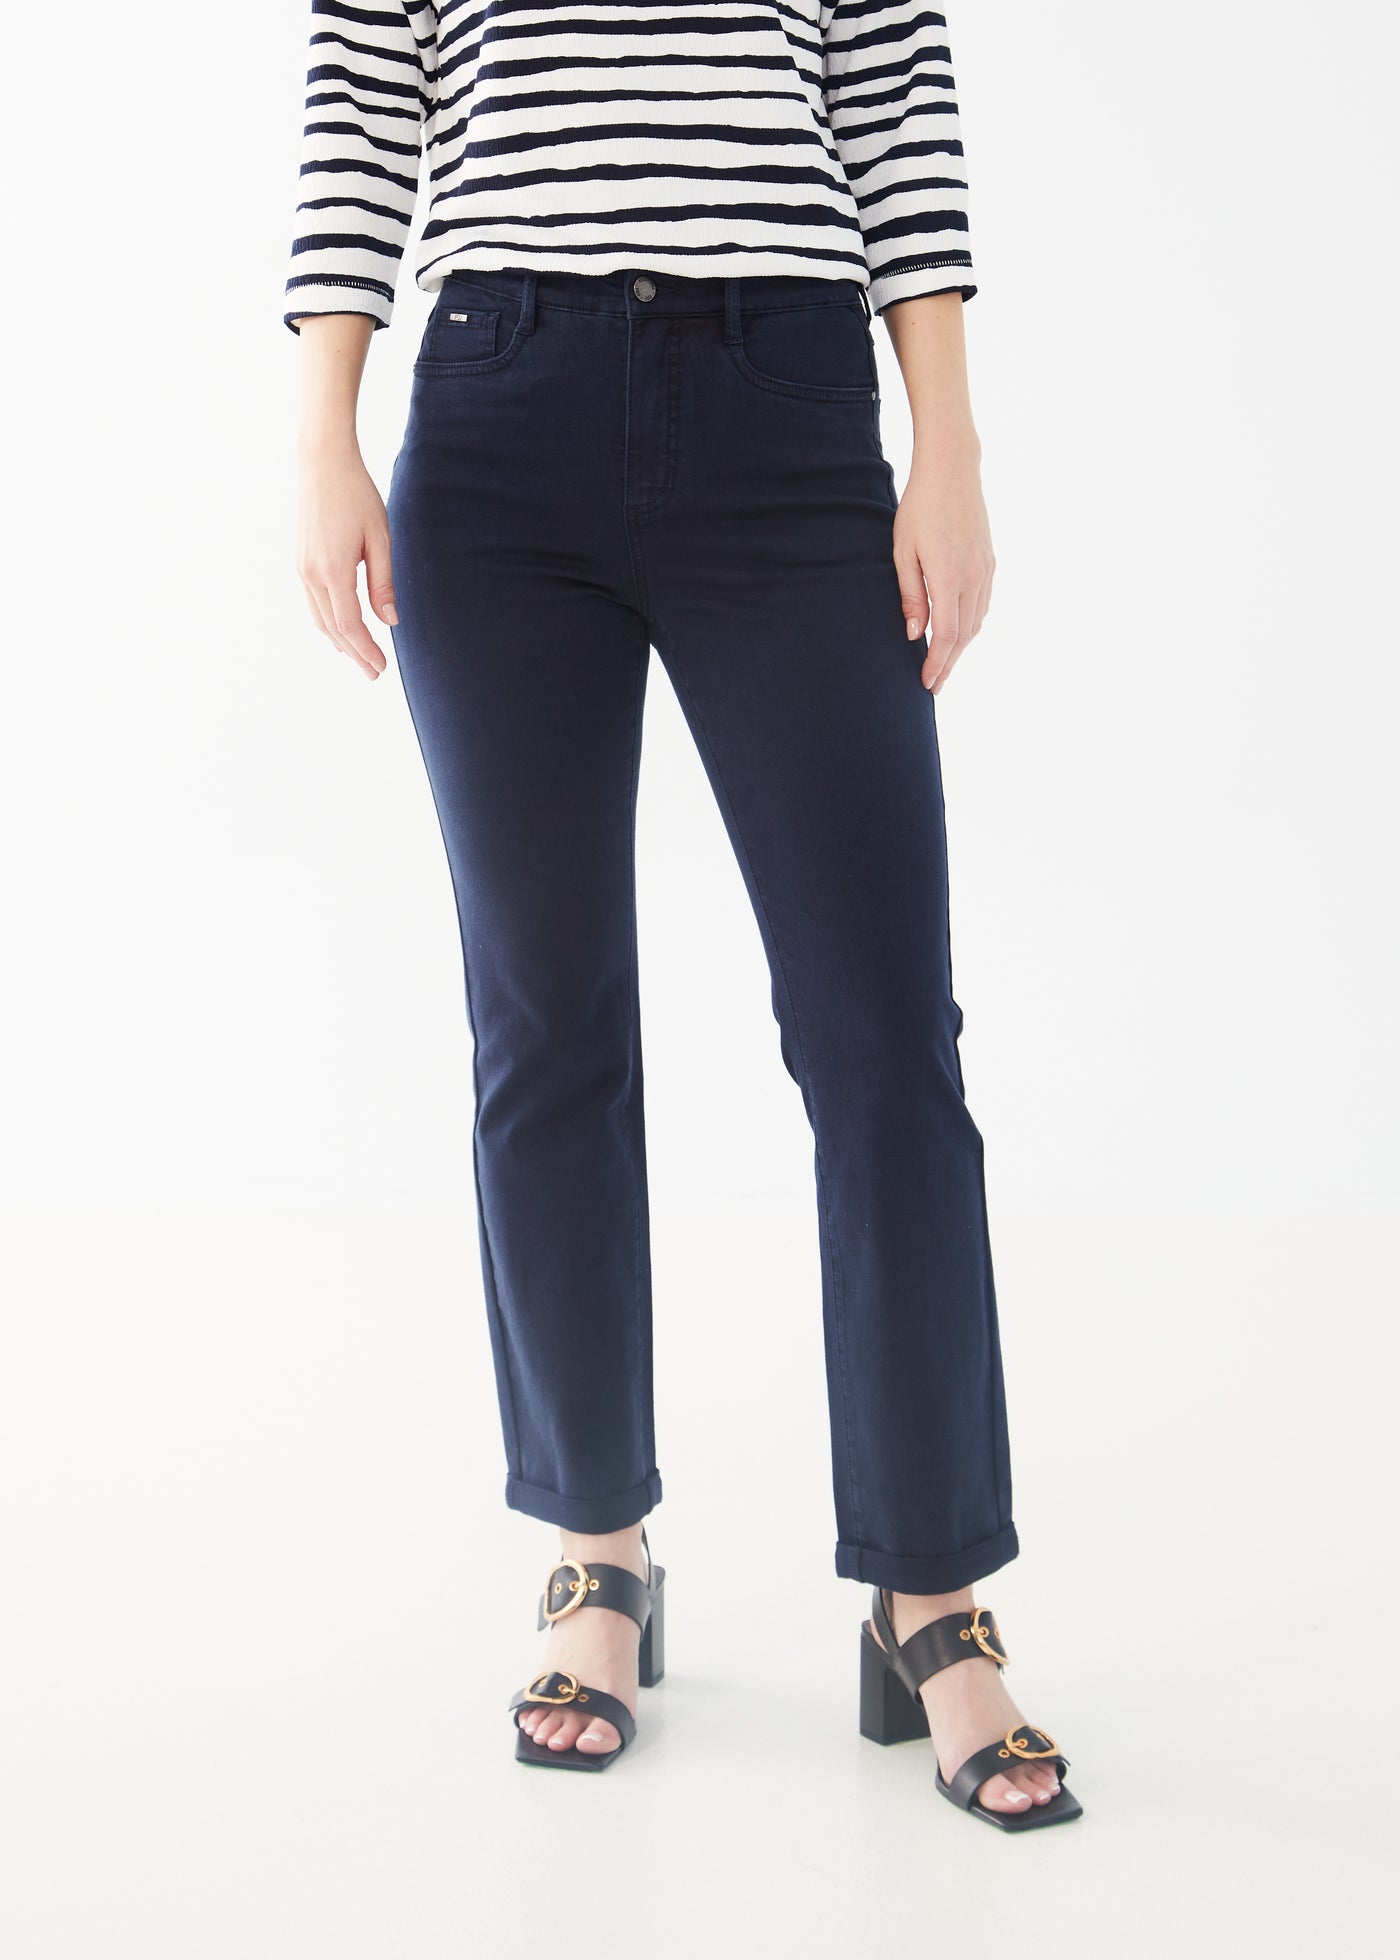 Navy Suzanne Rolled Cuff Pant